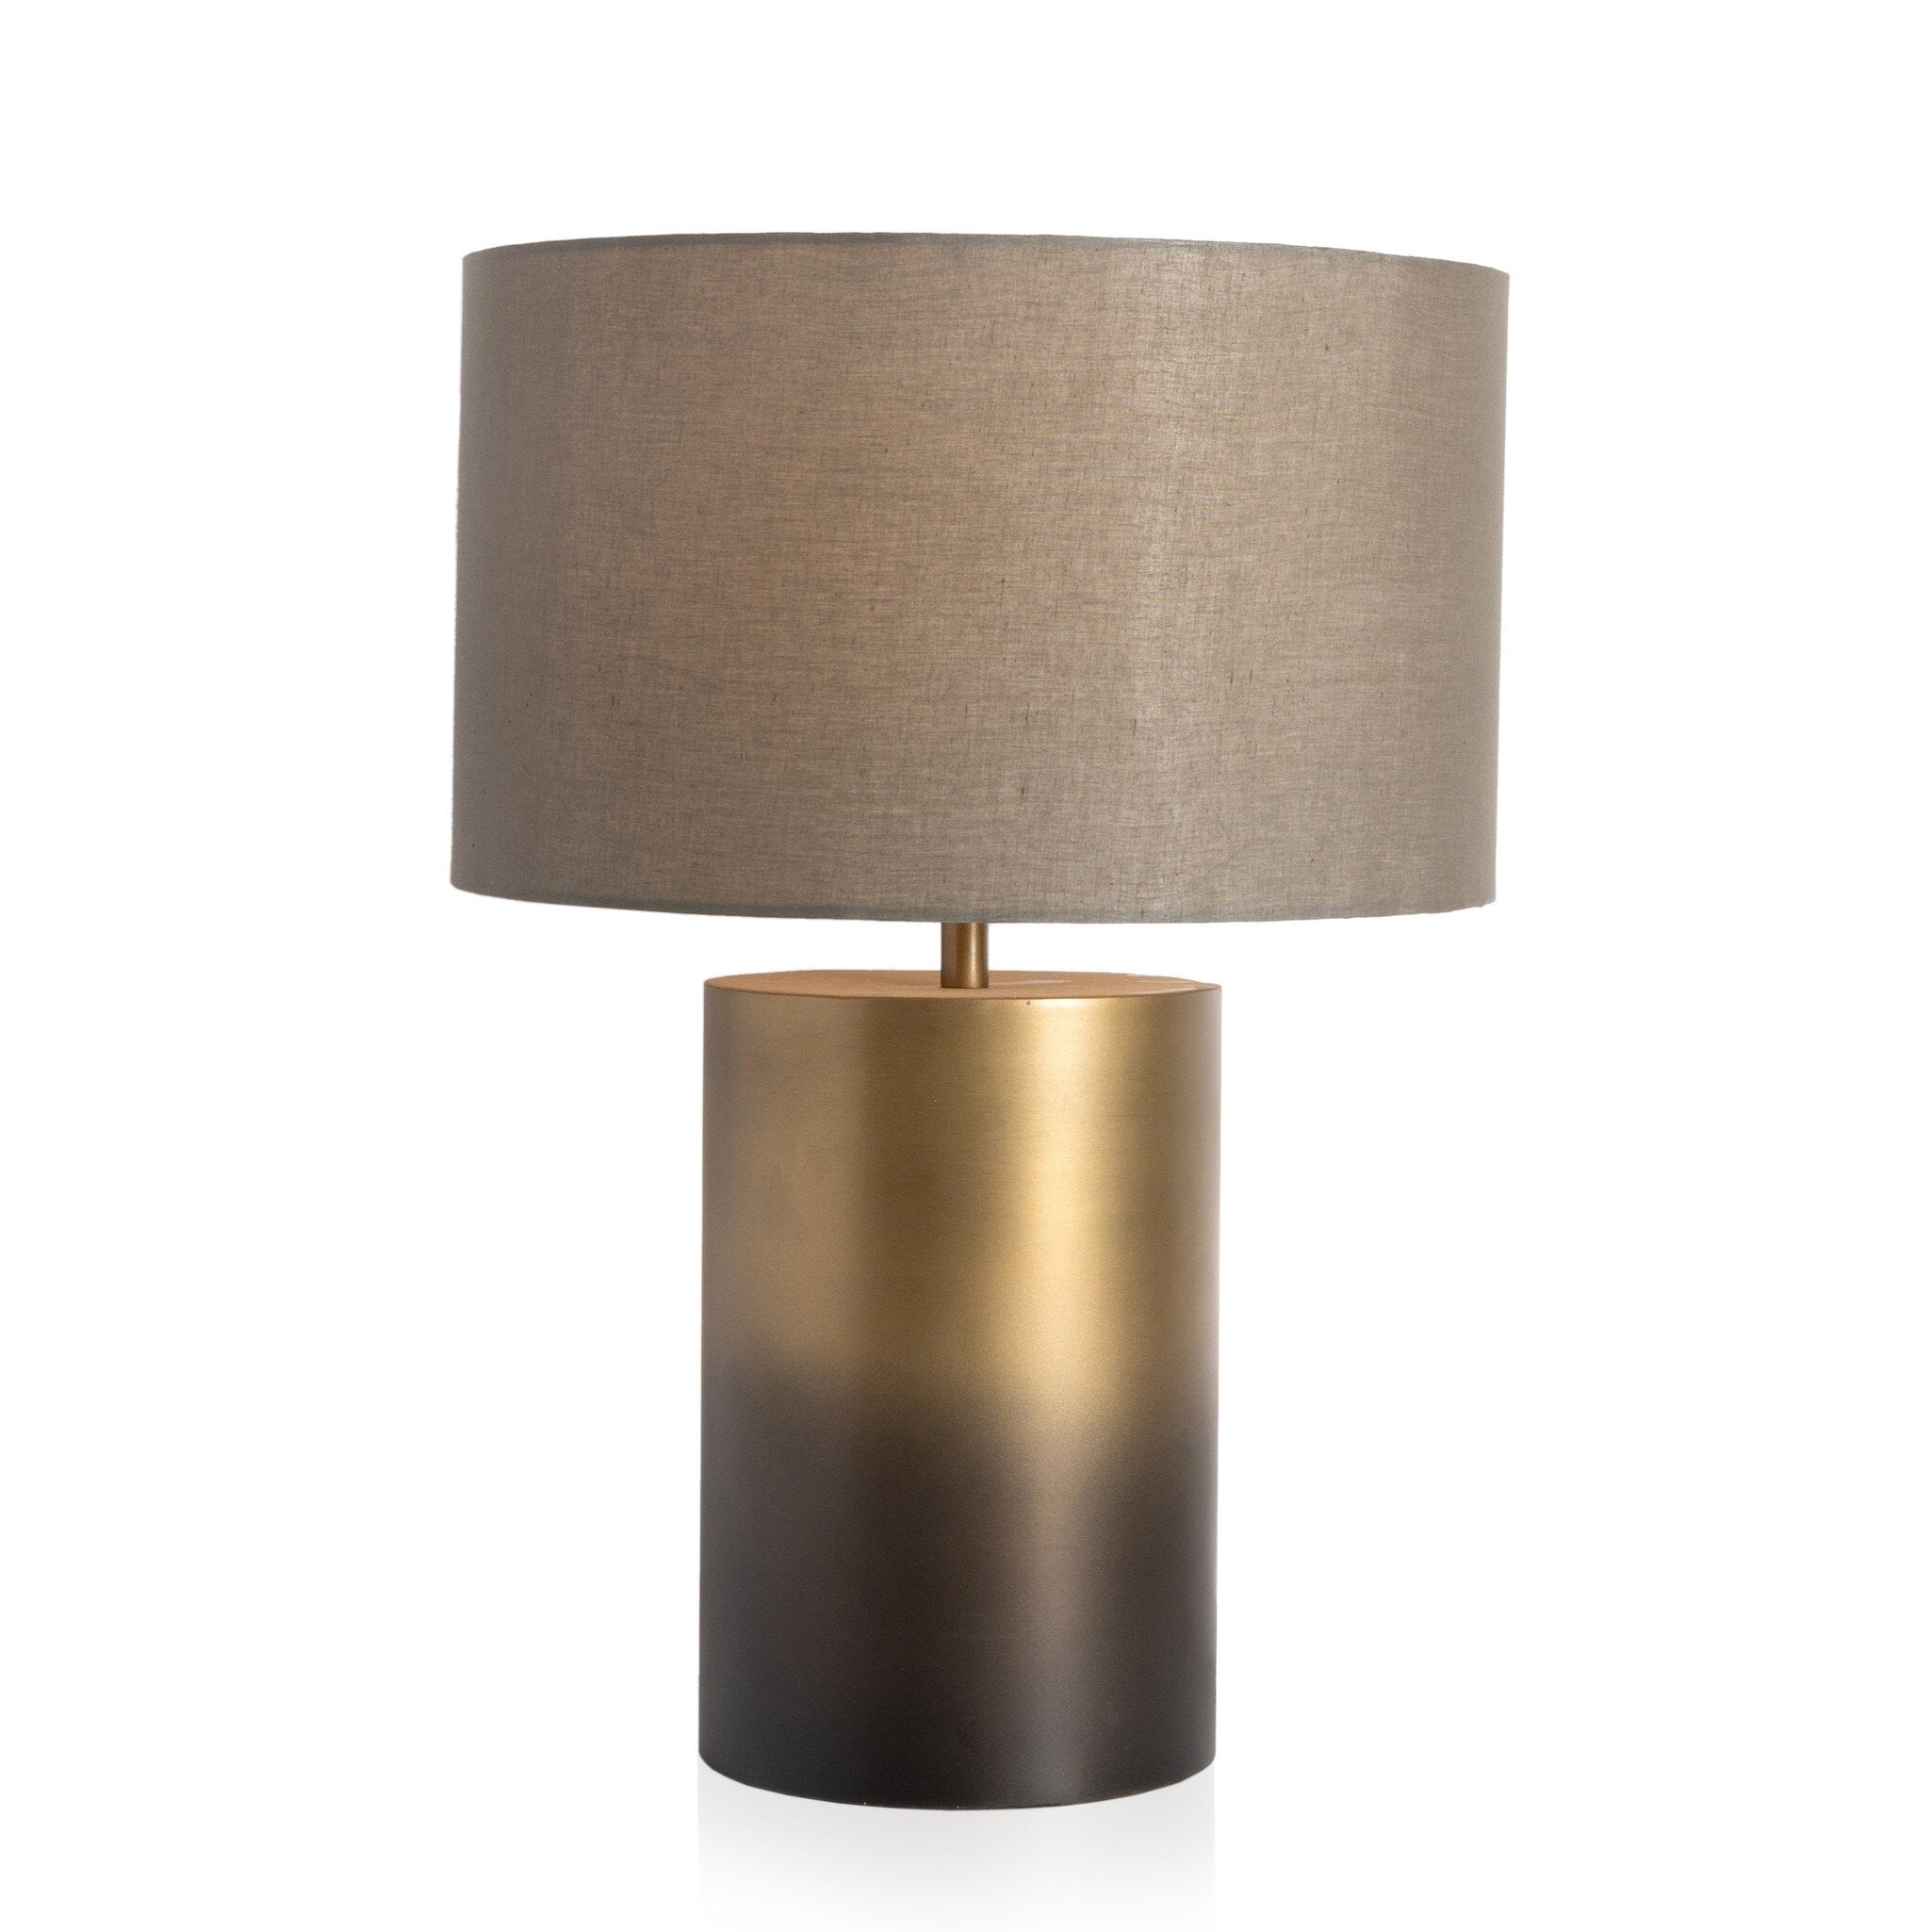 Cameron Table Lamp - Ombre Antique Brass